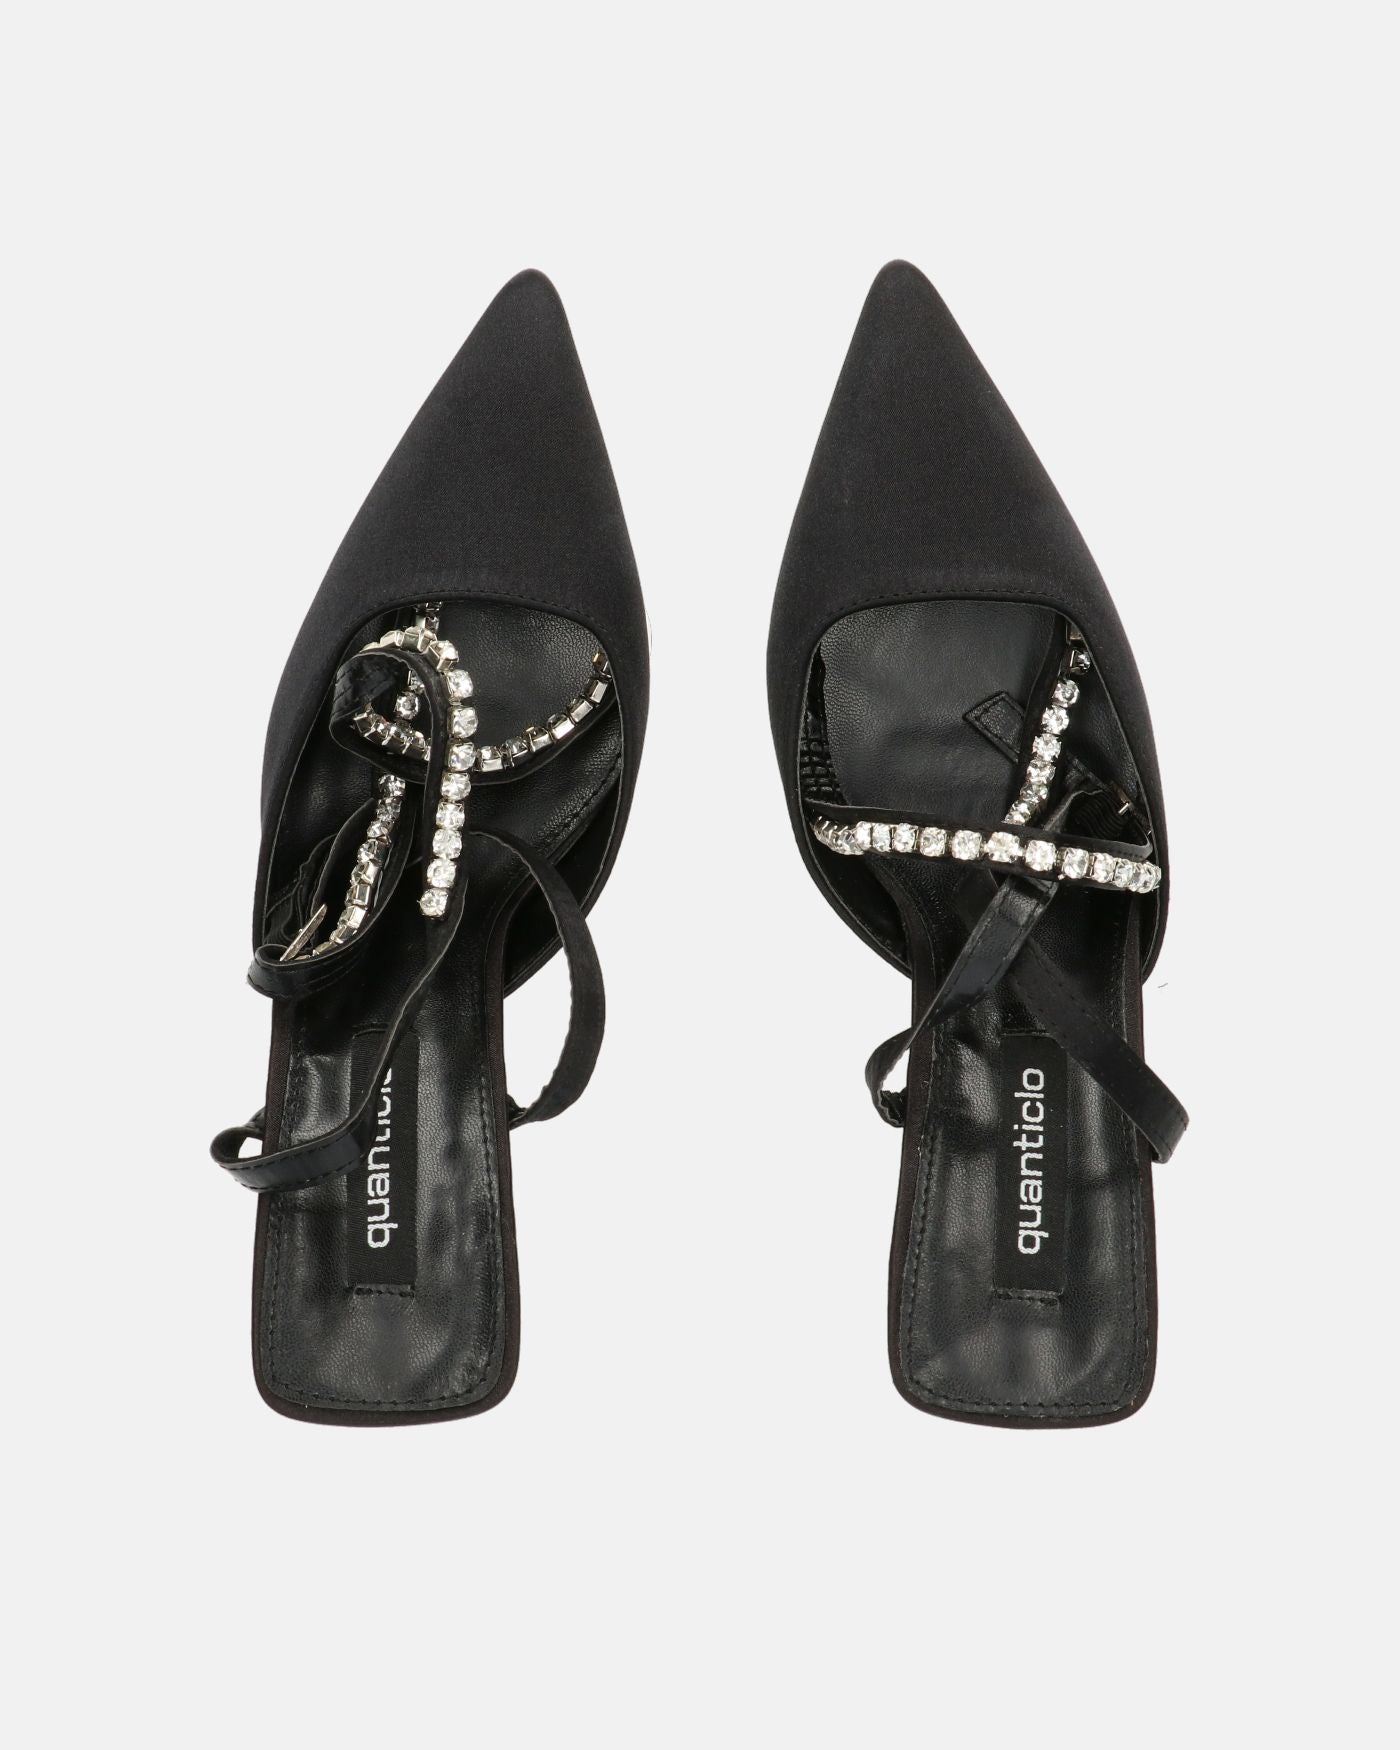 DORIS - heeled shoes in black lycra and gems on the strap